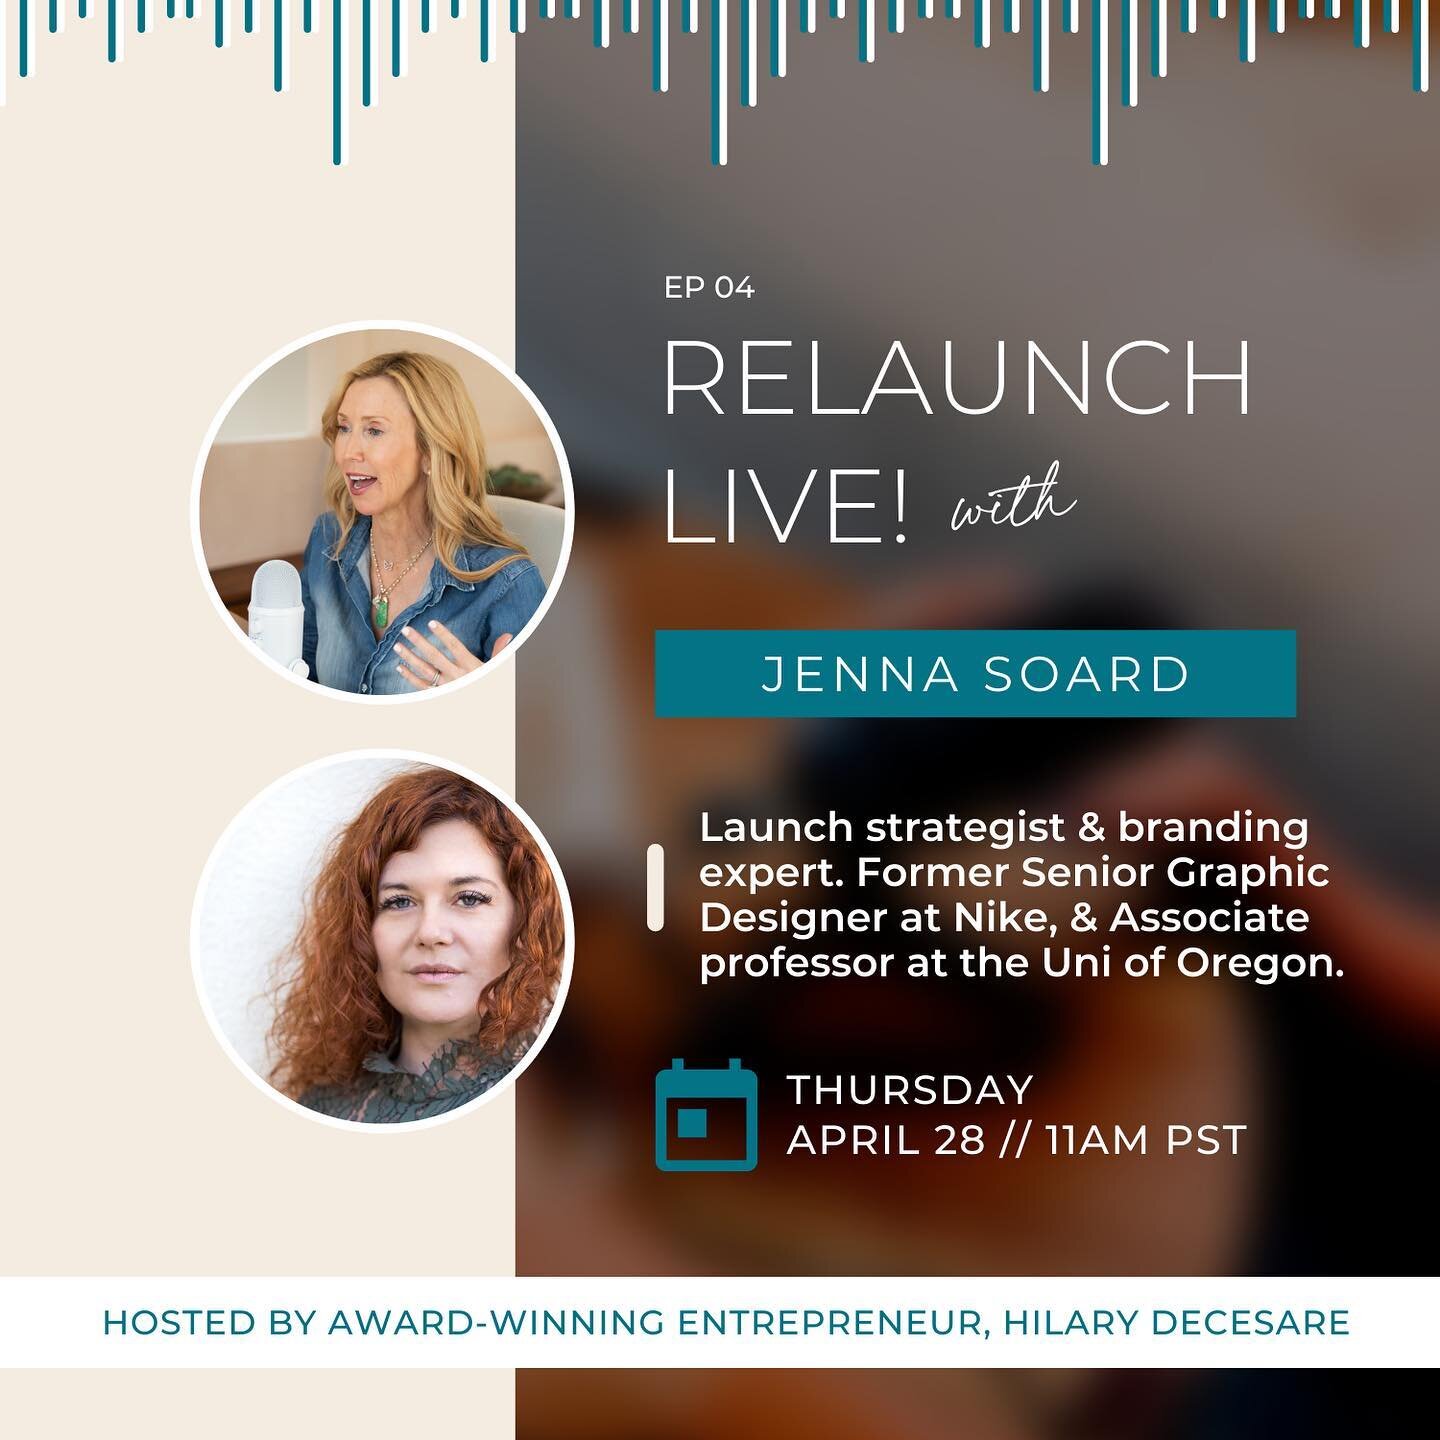 &quot;Check out my live interview with host Hilary DeCesare on The reLaunch Live airing on Thursday, 4/28 at 11am PST as we talk about how I re-launched my self, my biz and my love life with complete alignment&rdquo;. Link is NOT in Bio- but you can 